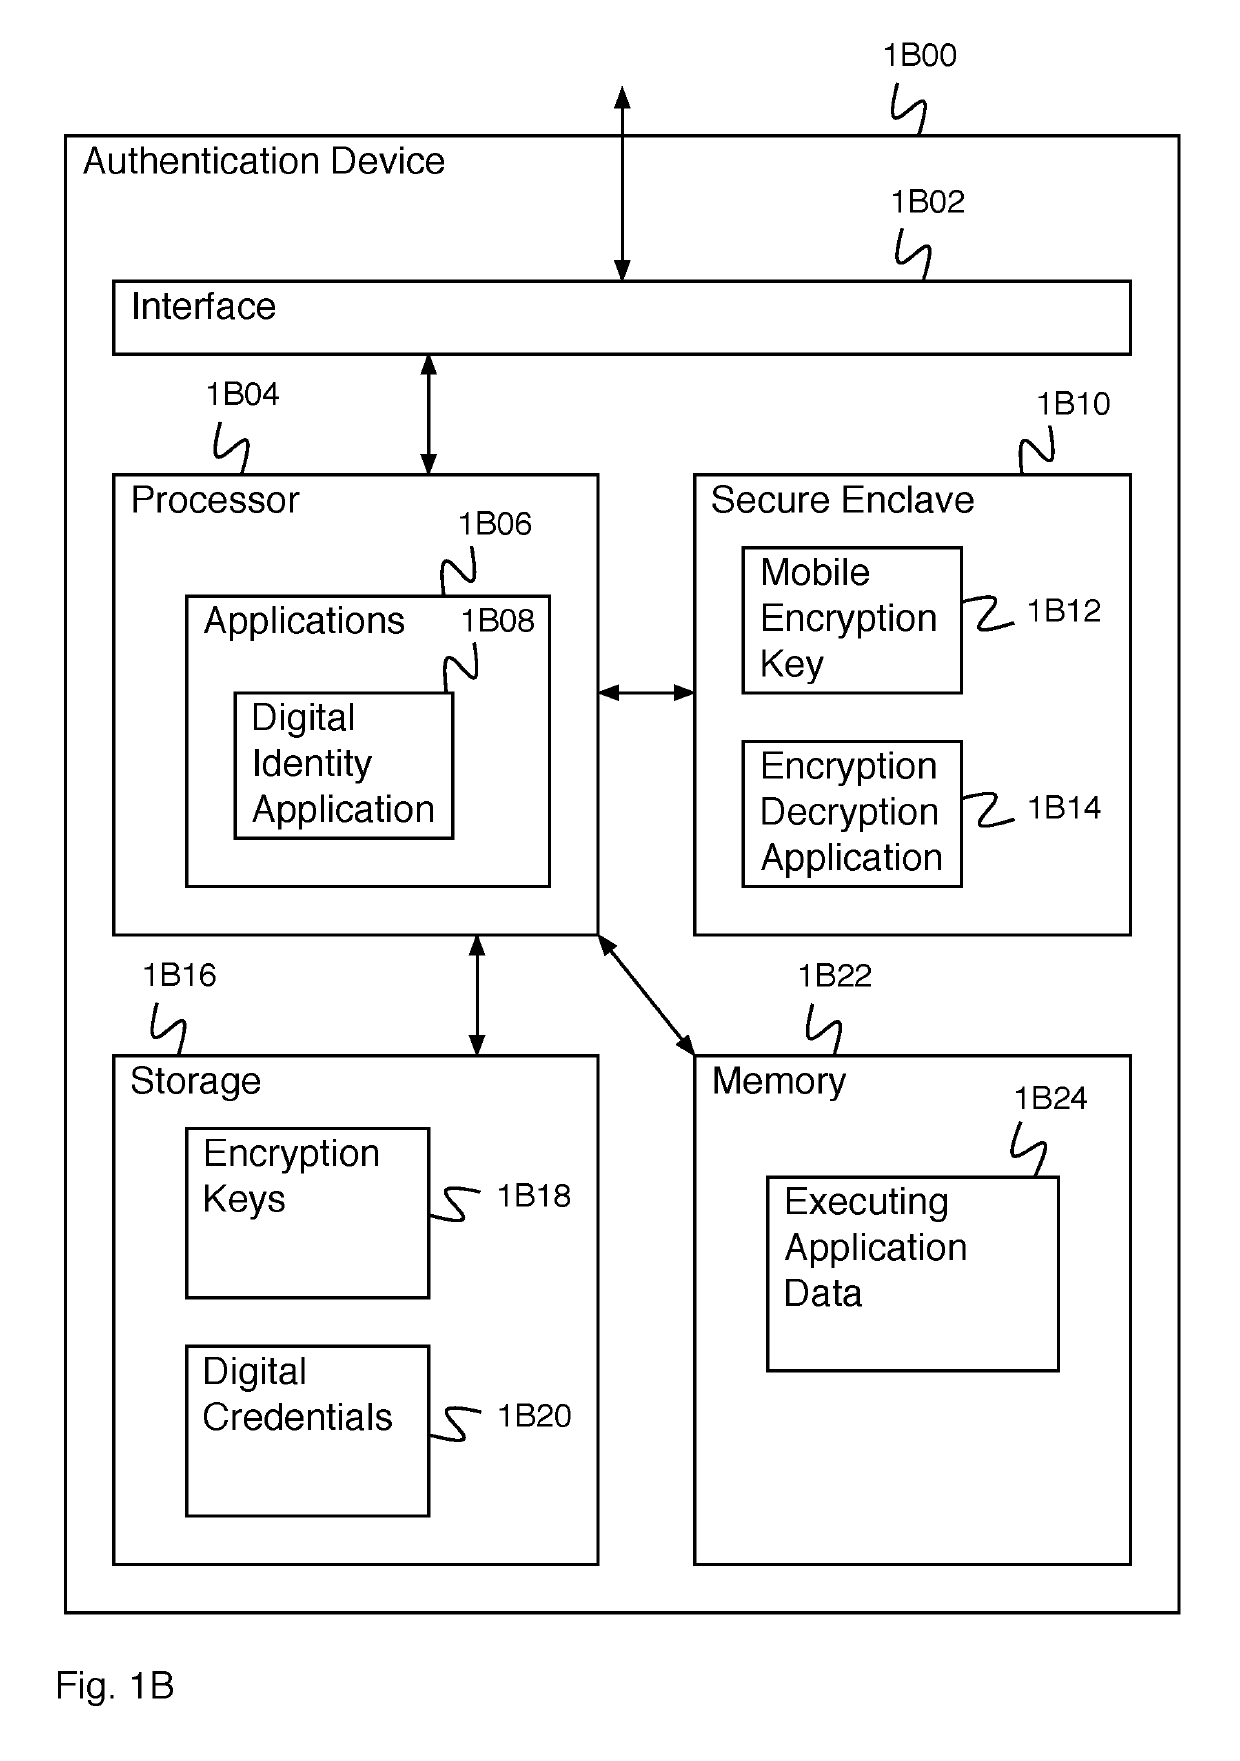 Digital credentials for user device authentication